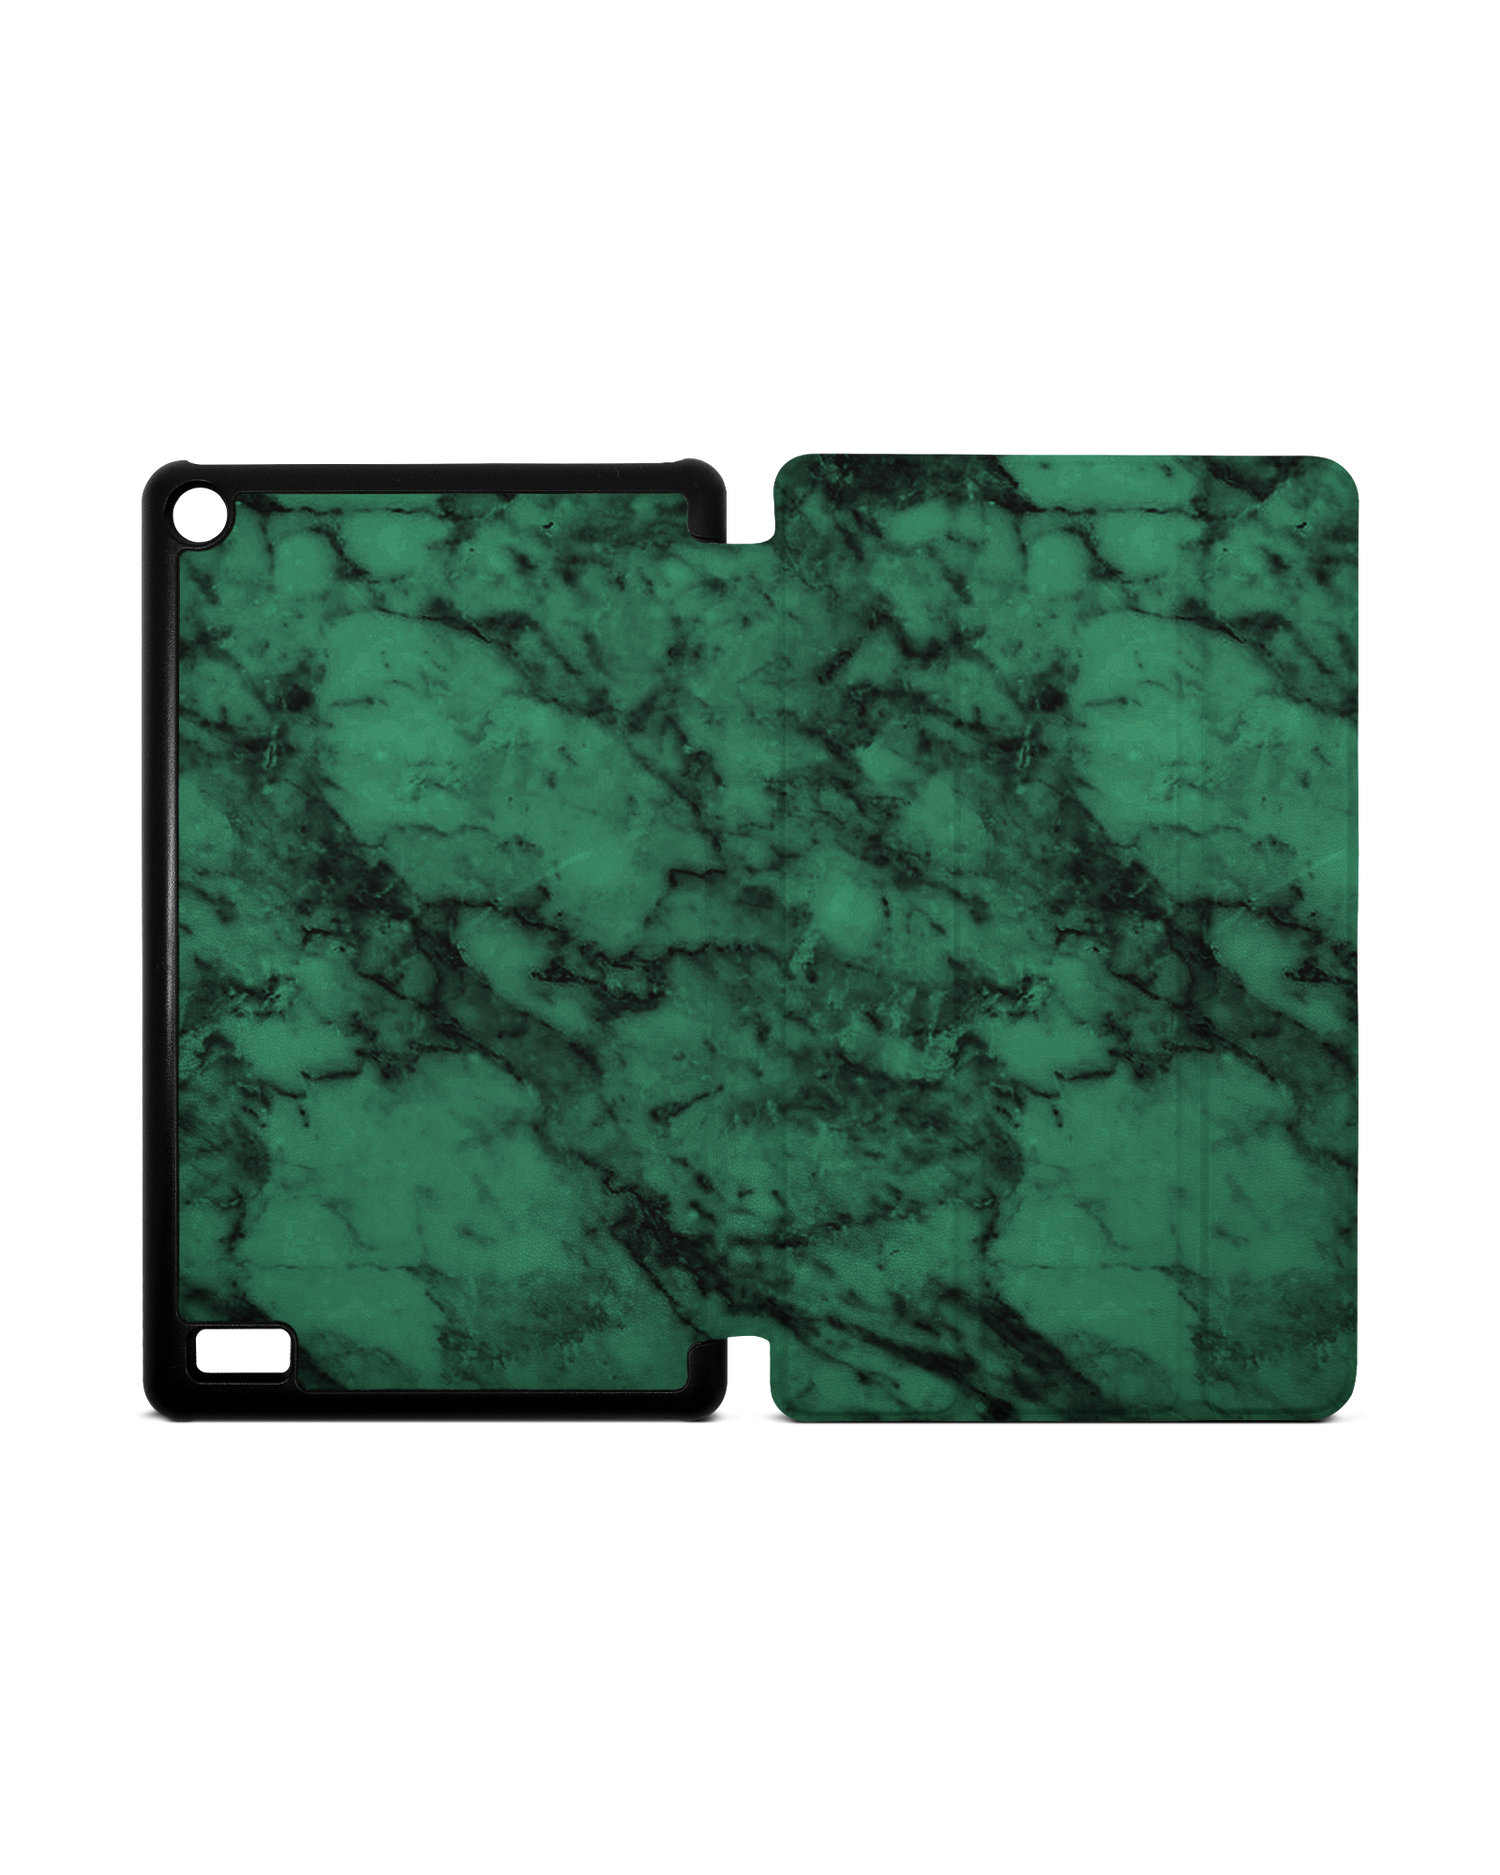 Green Marble Tablet Smart Case for Amazon Fire 7: Opened